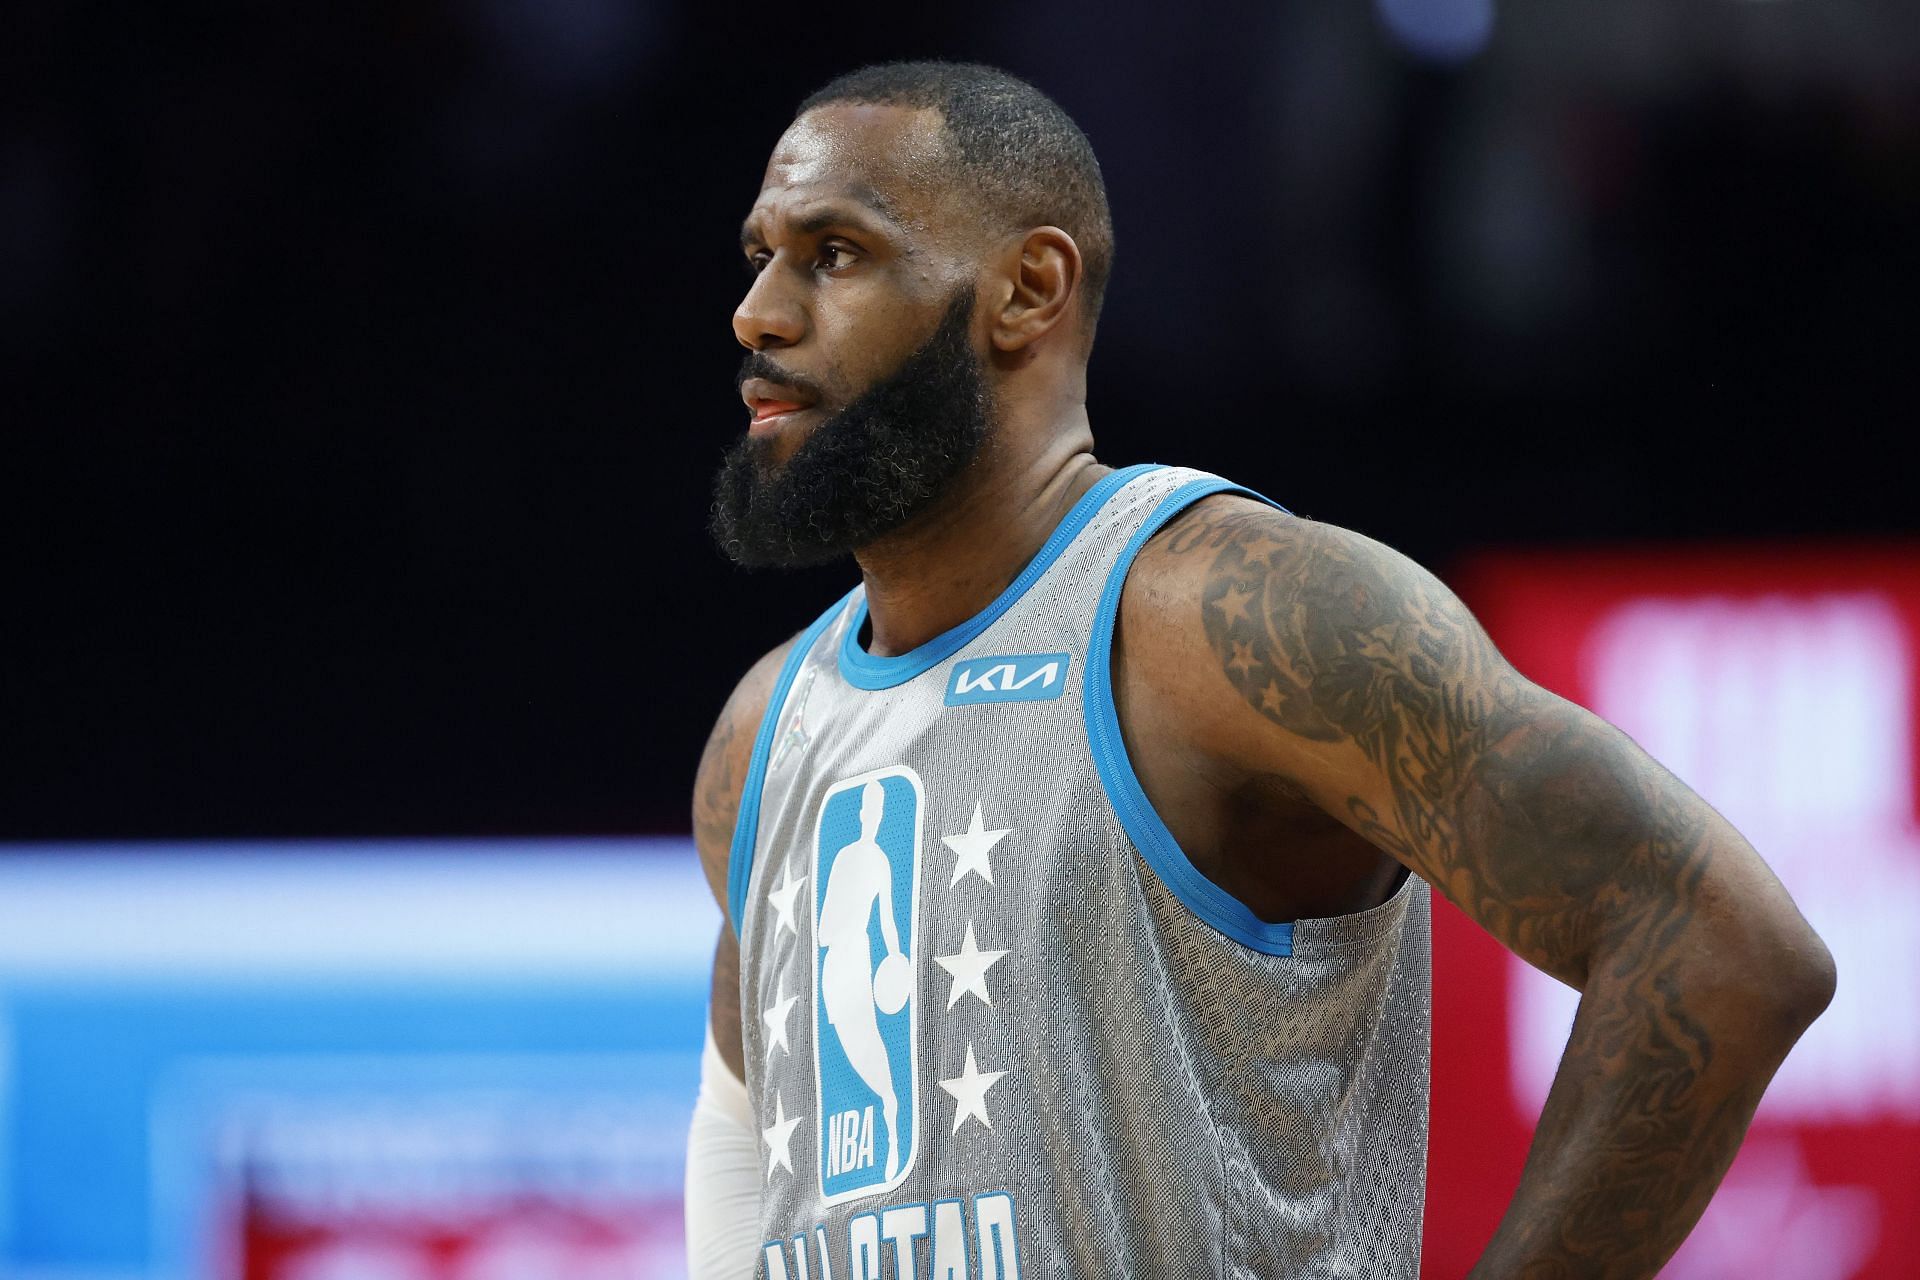 LeBron James at the 2022 NBA All-Star Game.